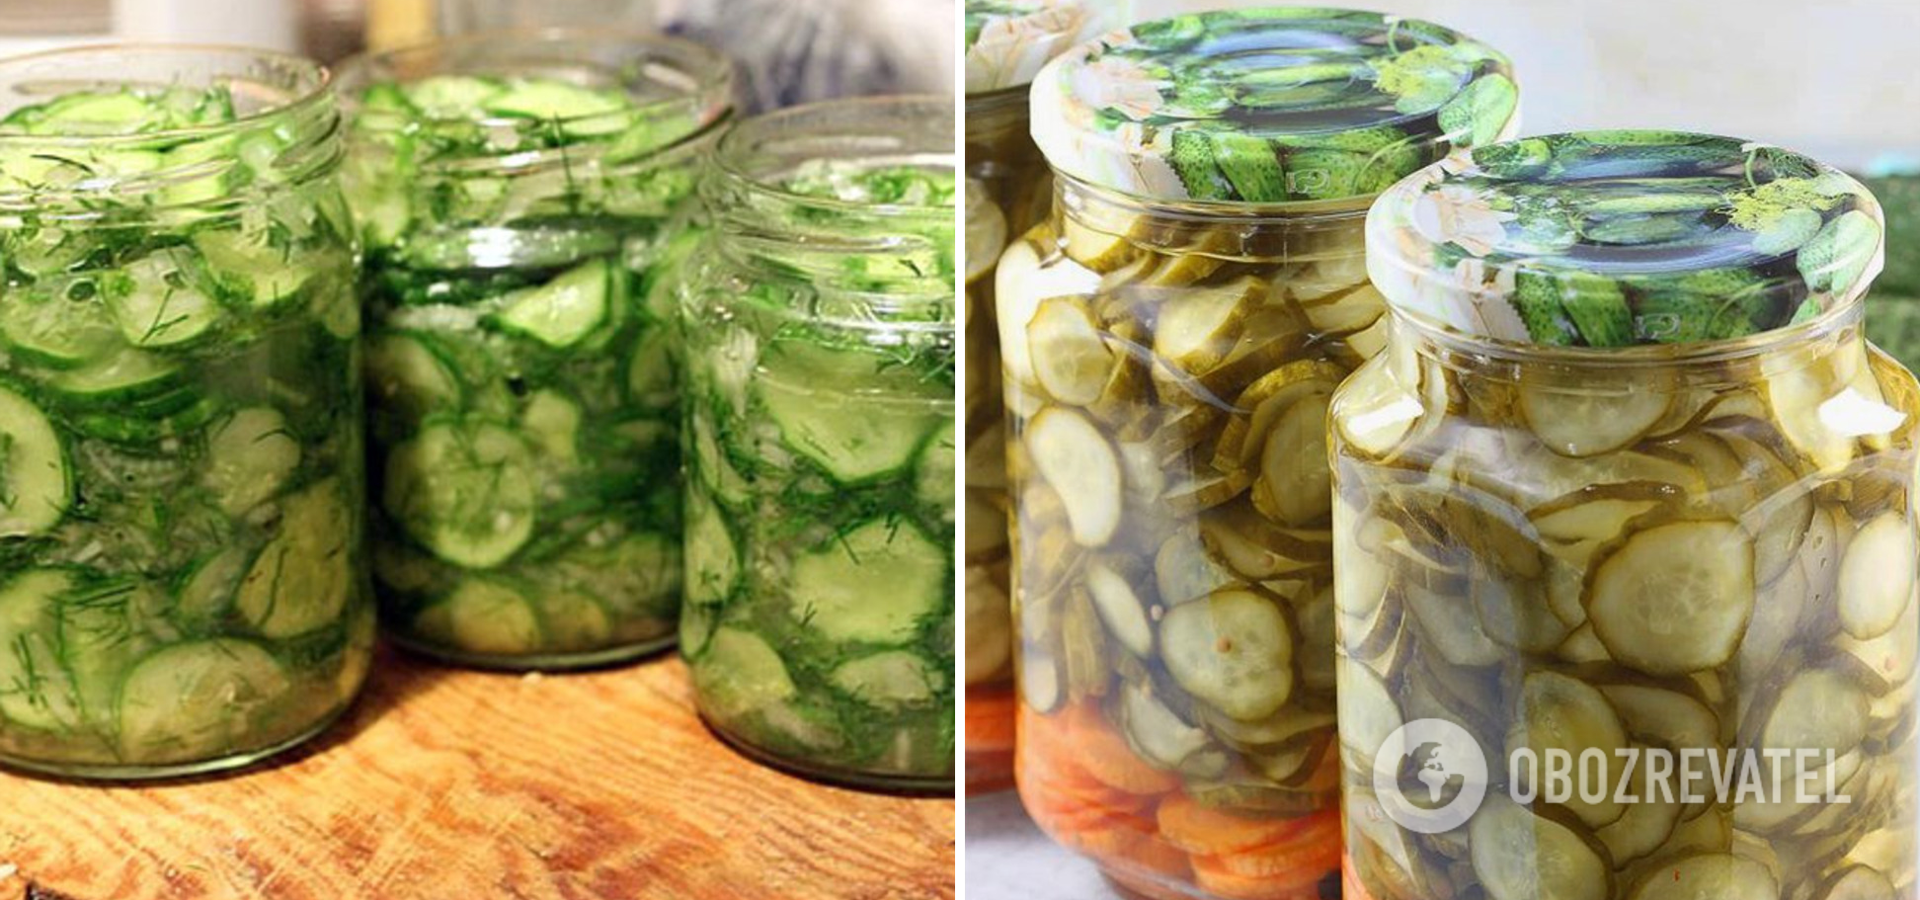 What to do with exploded cucumbers: can you eat such vegetables